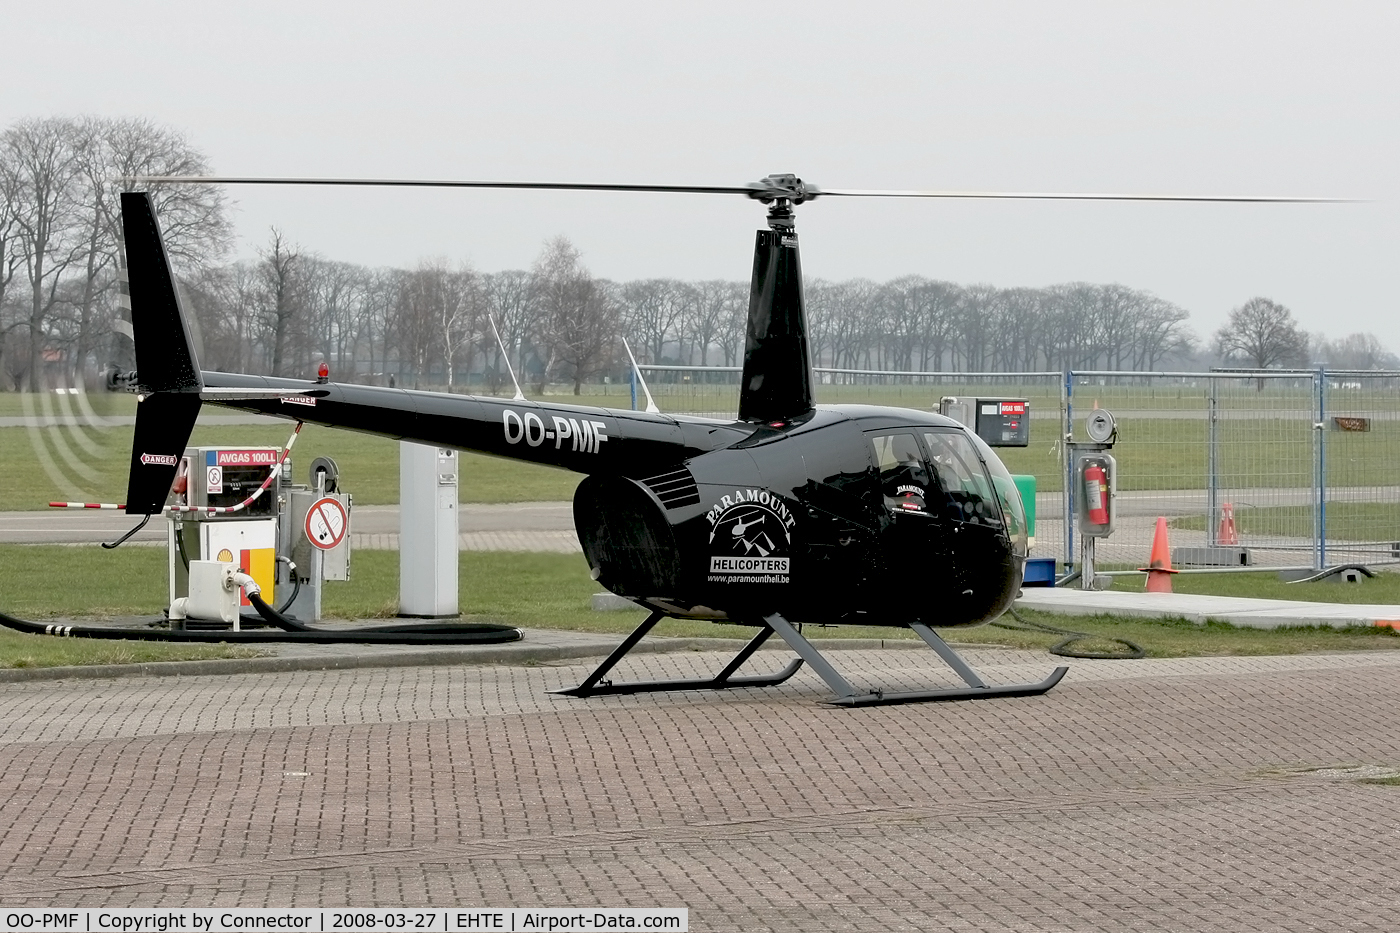 OO-PMF, 2007 Robinson R44 Raven I C/N 1750, Refueling at Teuge.